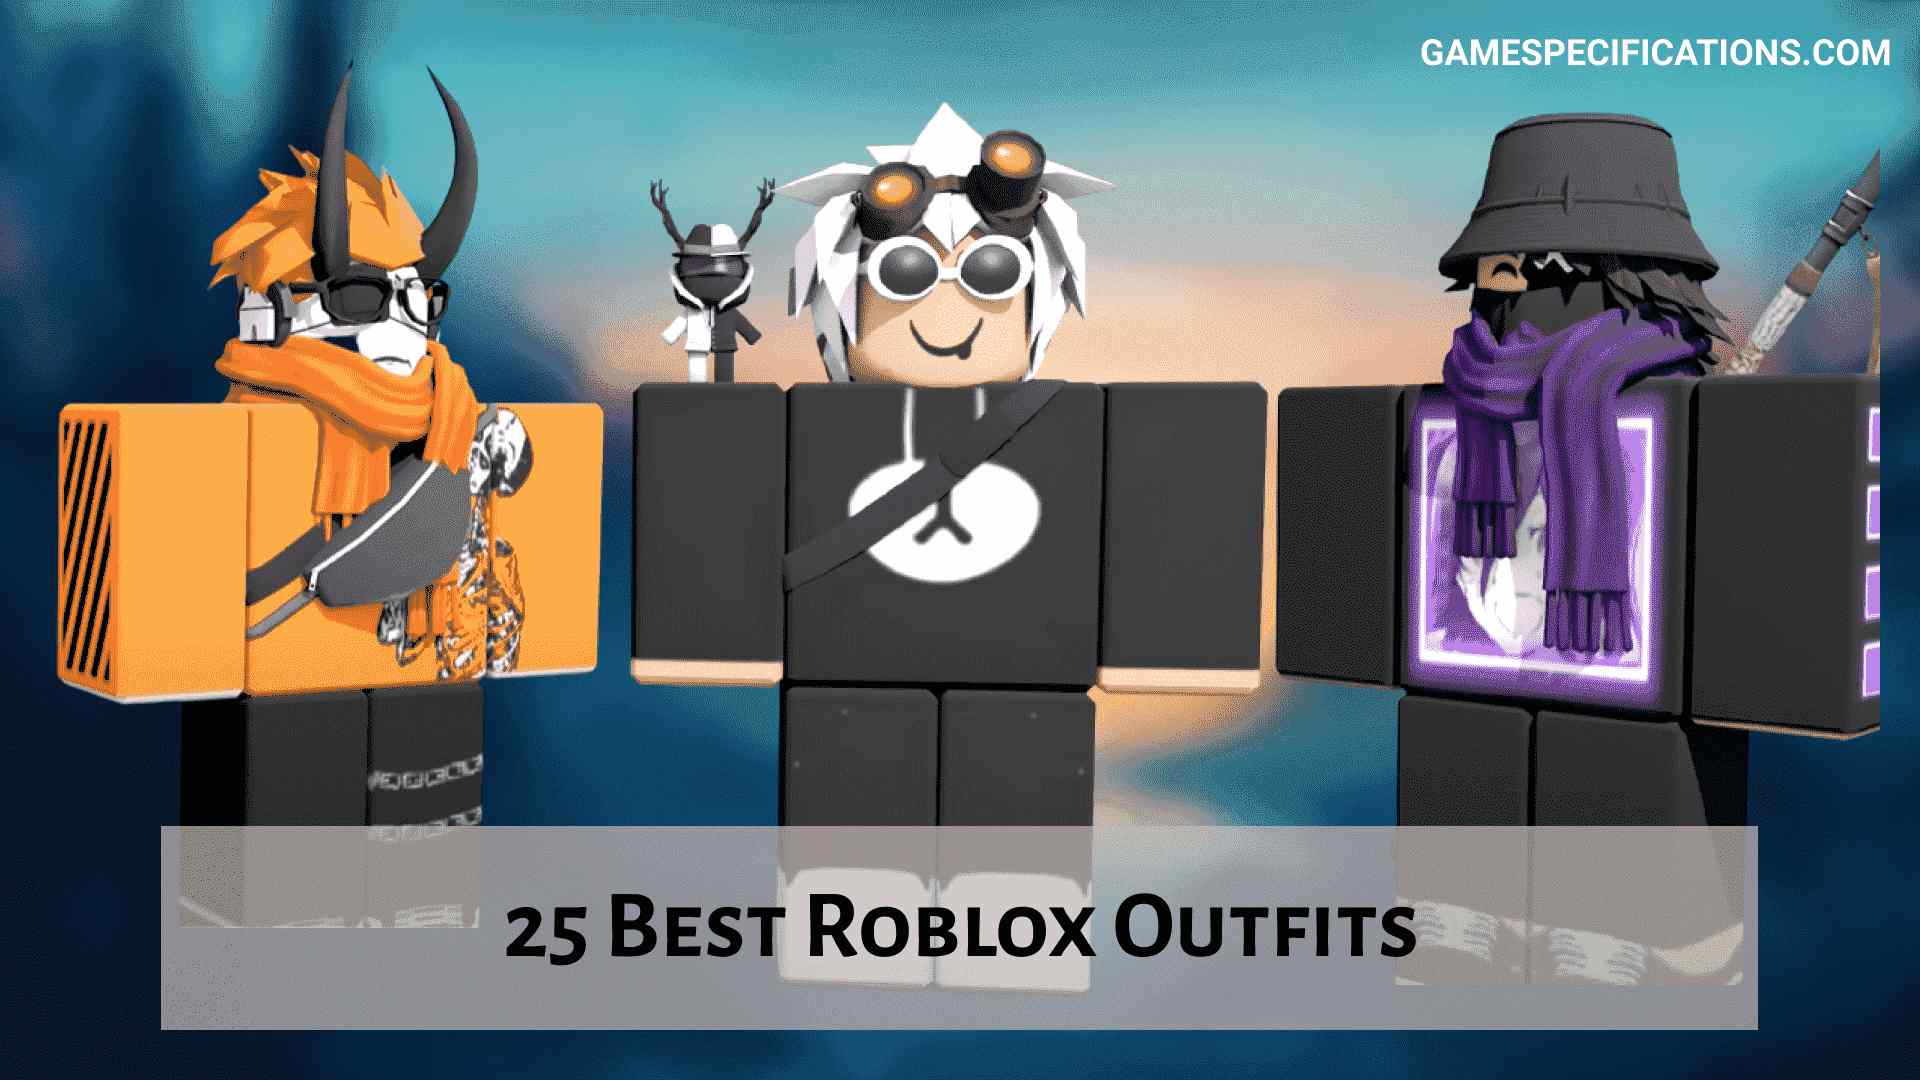 Best 25 Roblox Outfits You Ll Ever Need 2021 Game Specifications - og roblox outfits